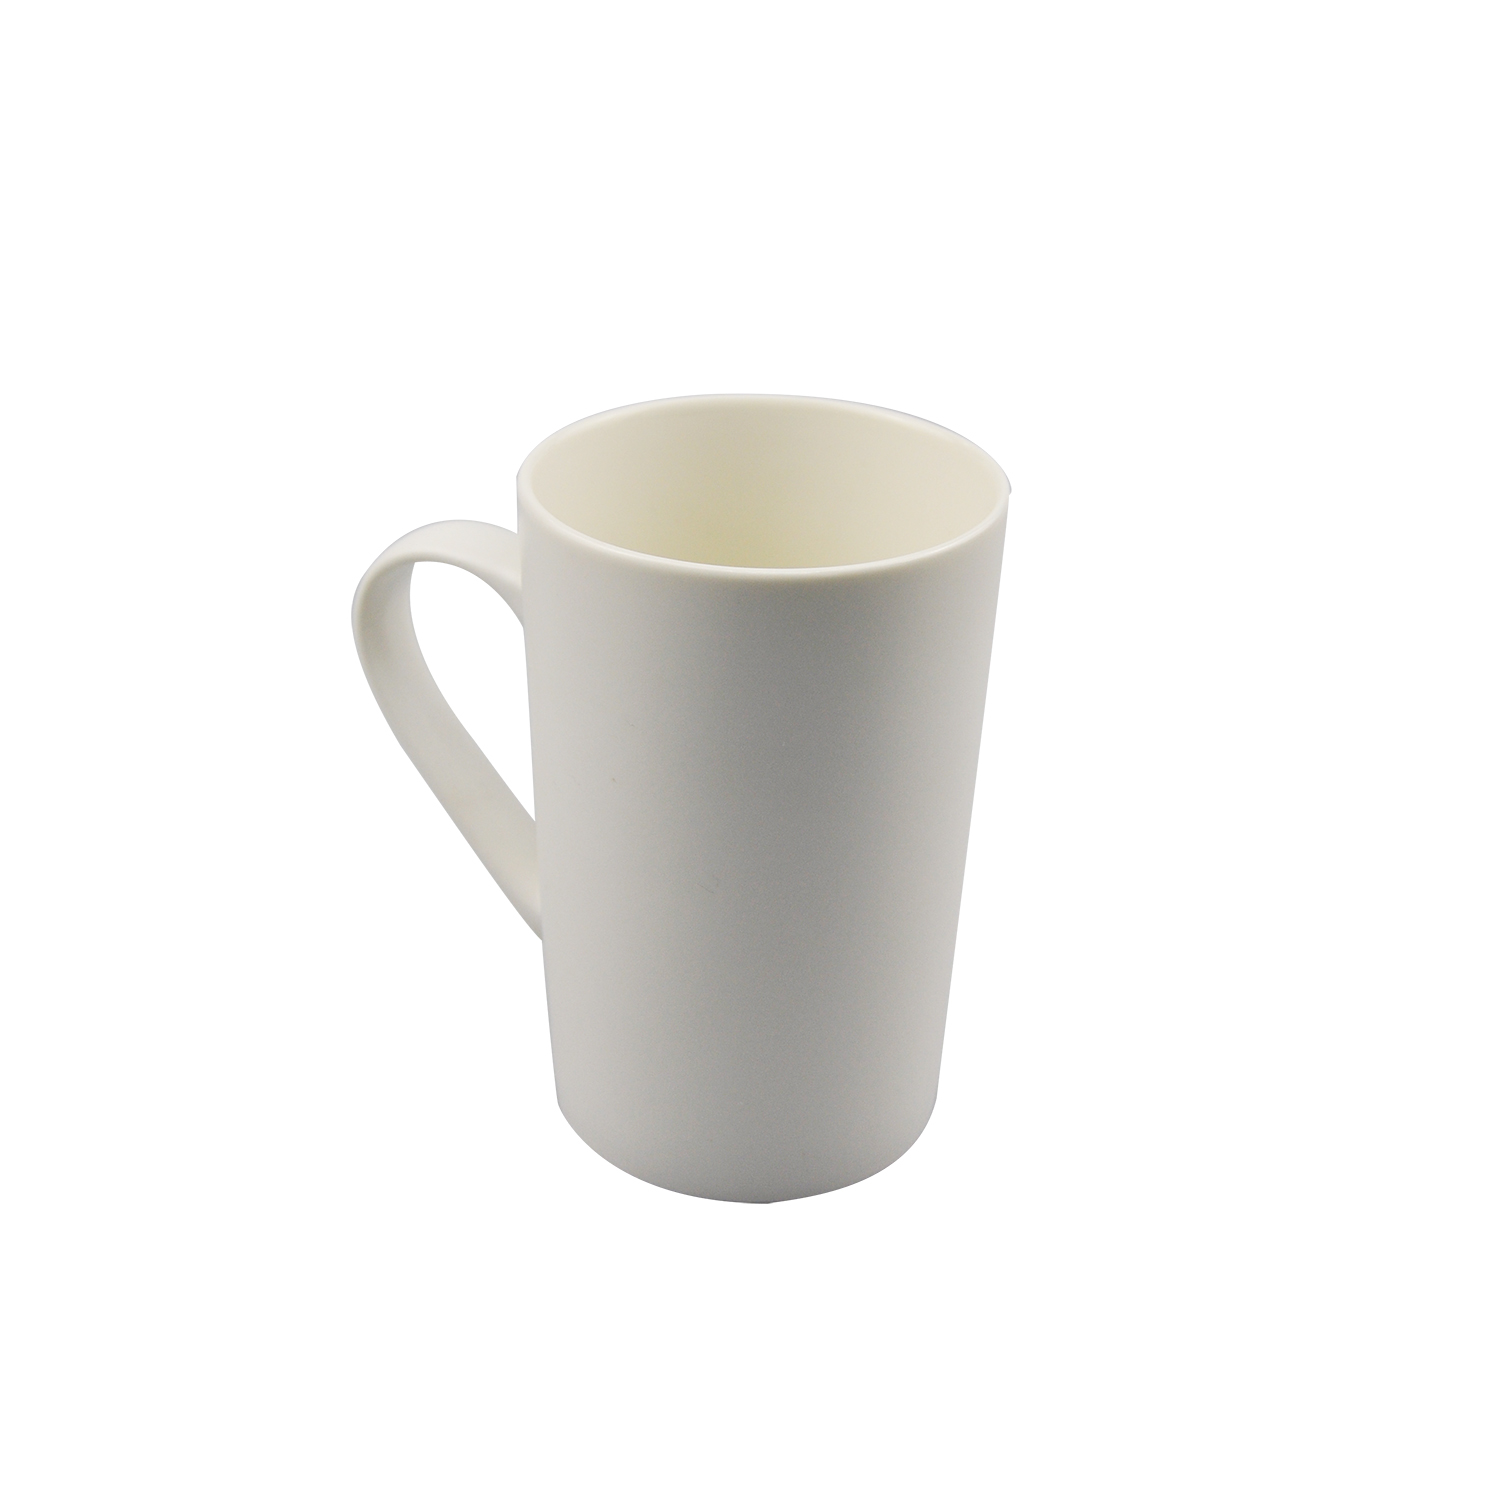 White Disposable Frosted Drinking Cup Ceramic Mug with Handle